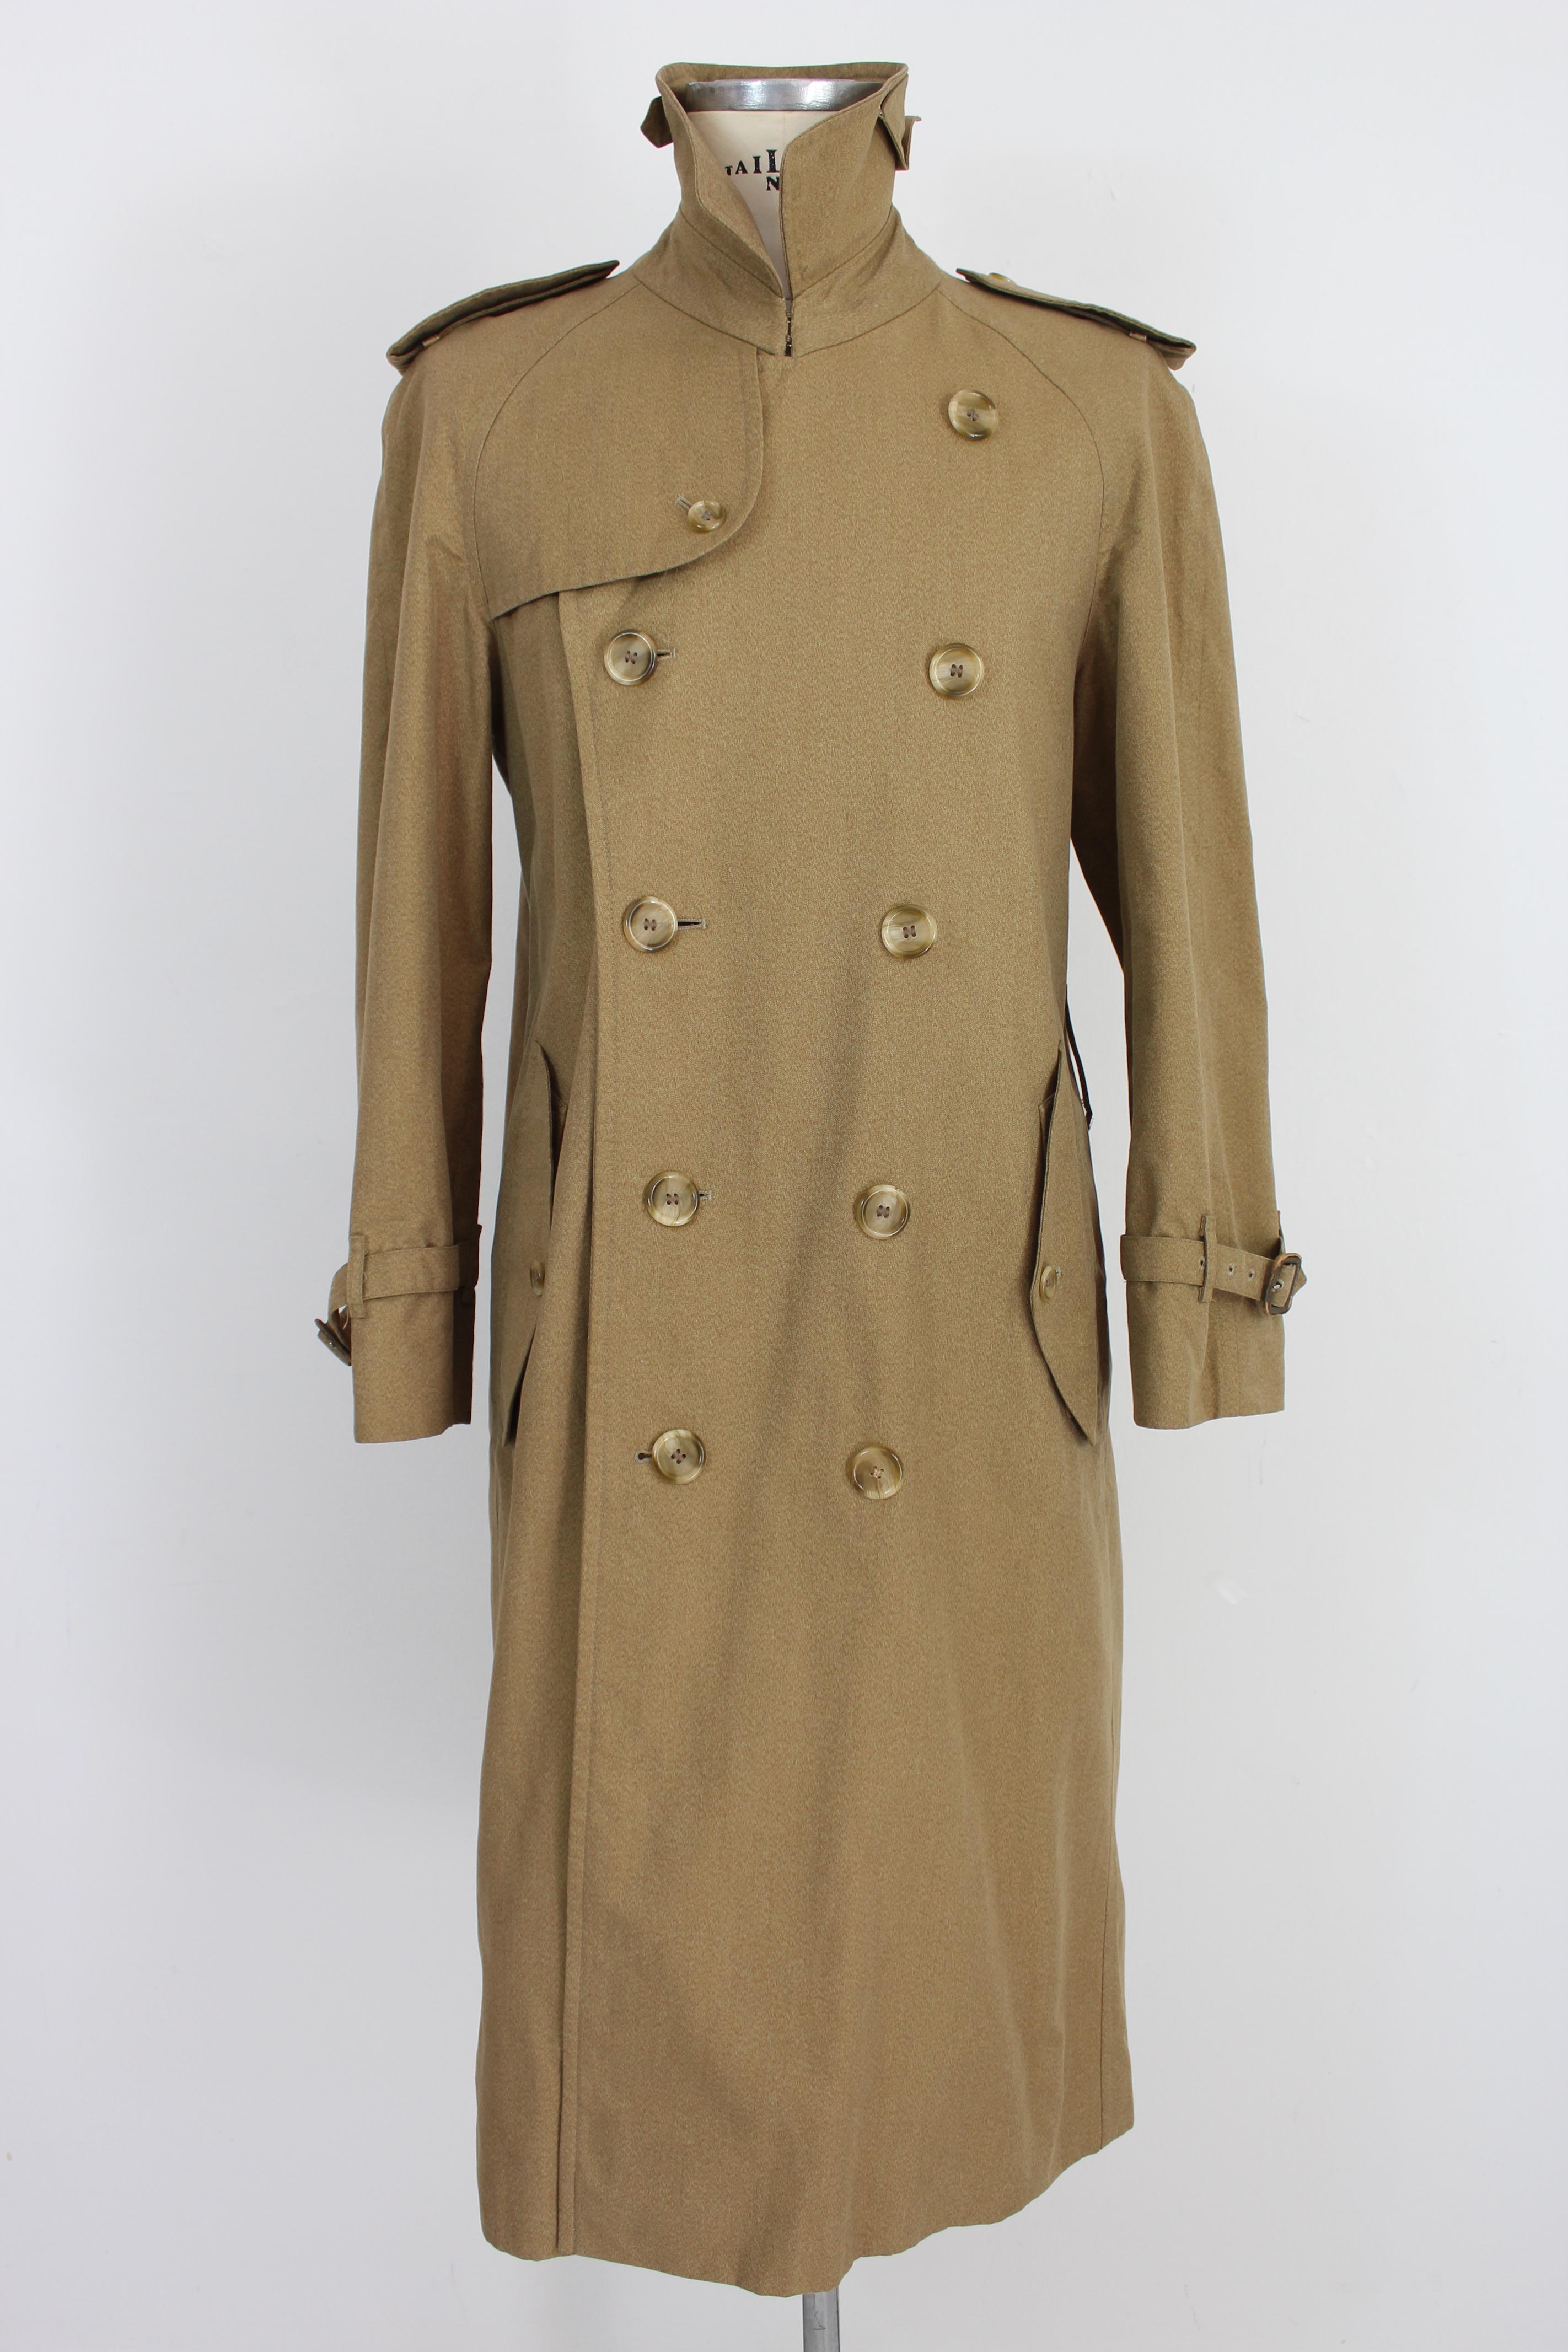 Burberry Beige Cotton Double Breasted Trench Coat 1980s 1